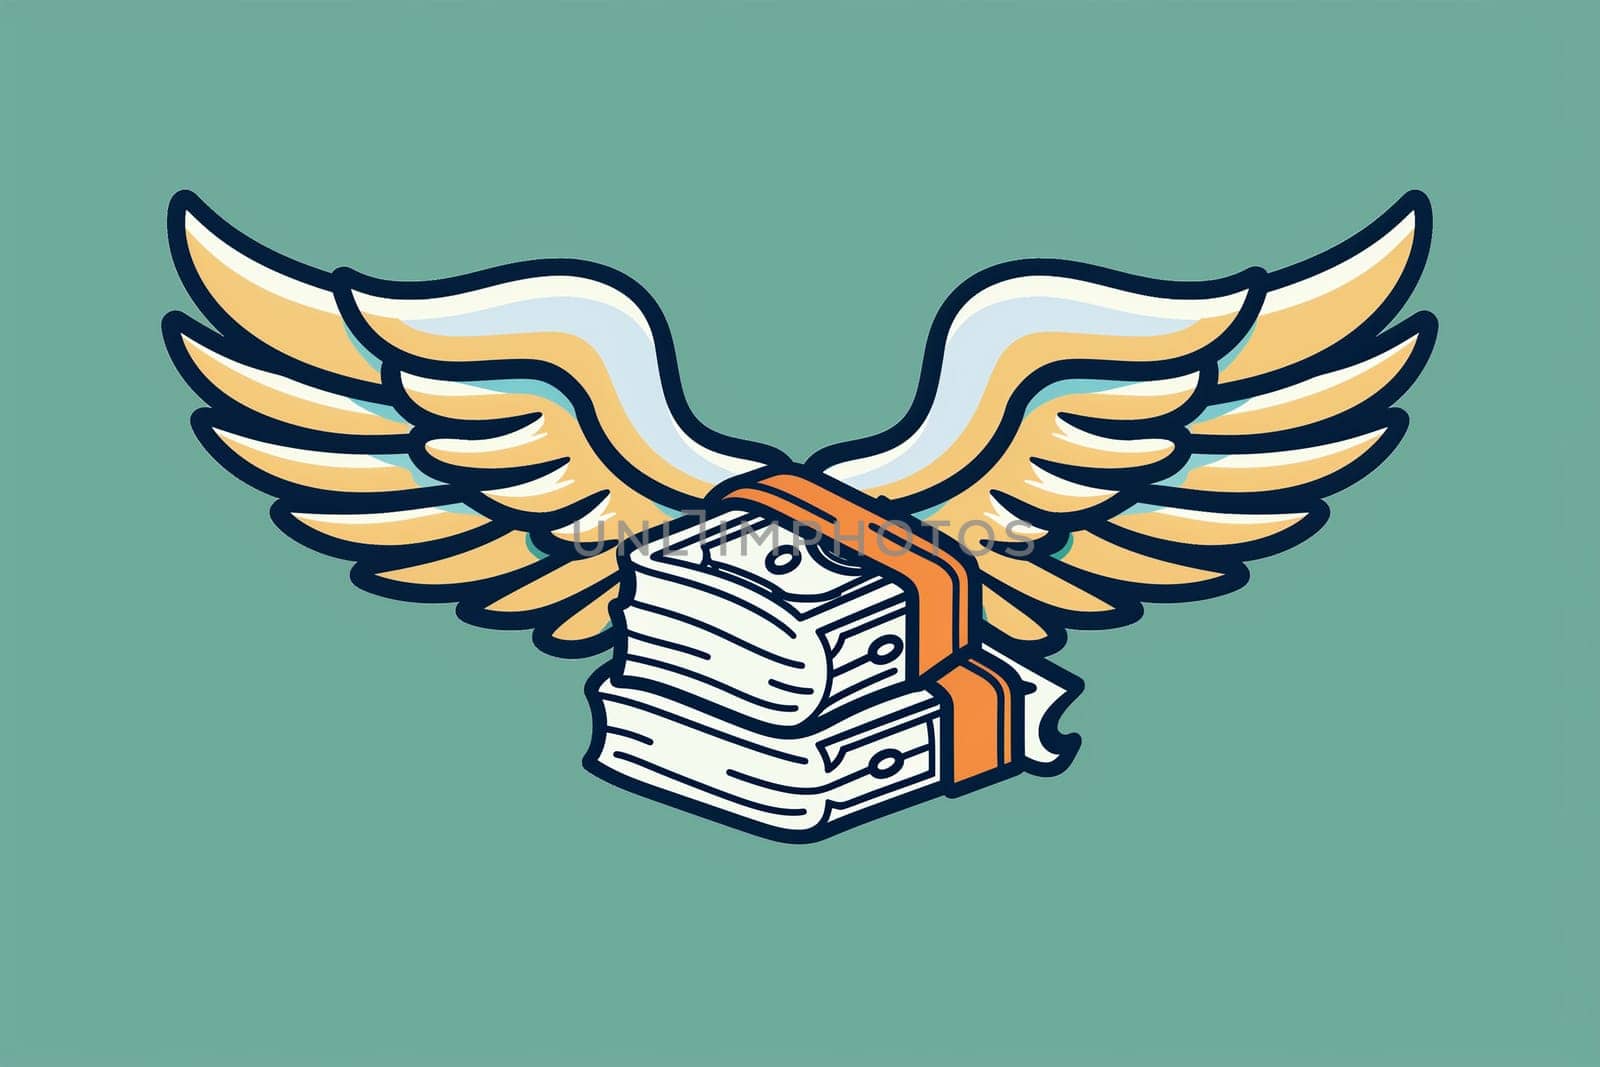 An illustration of a stack of money with wings, symbolizing financial success and potential growth.